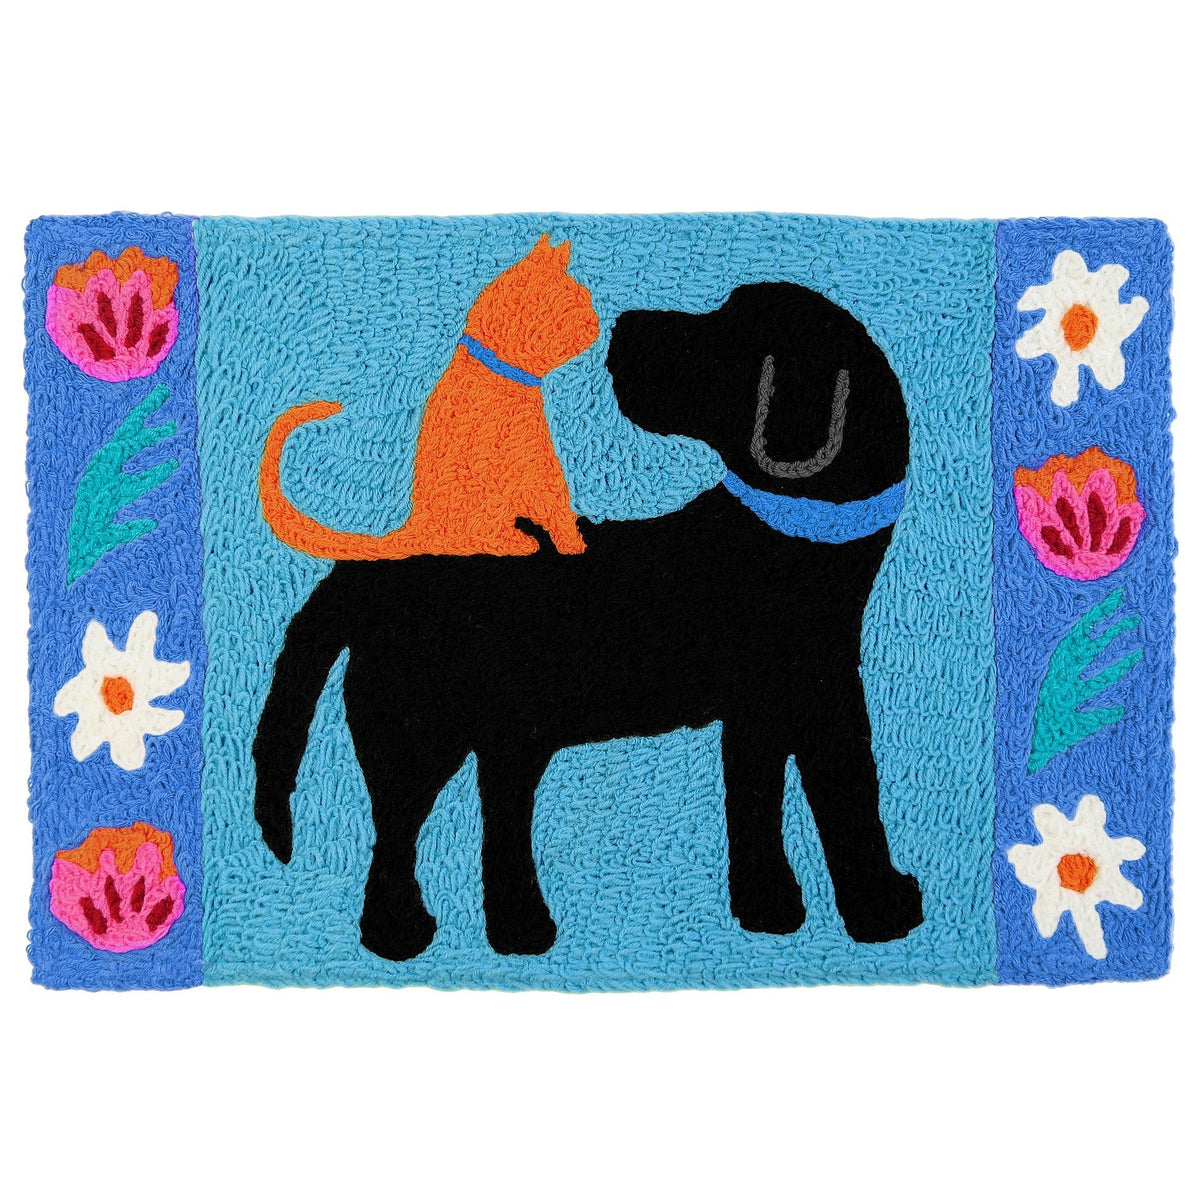 Jellybean Flower Power Dogs 20x30 Washable Accent Rug